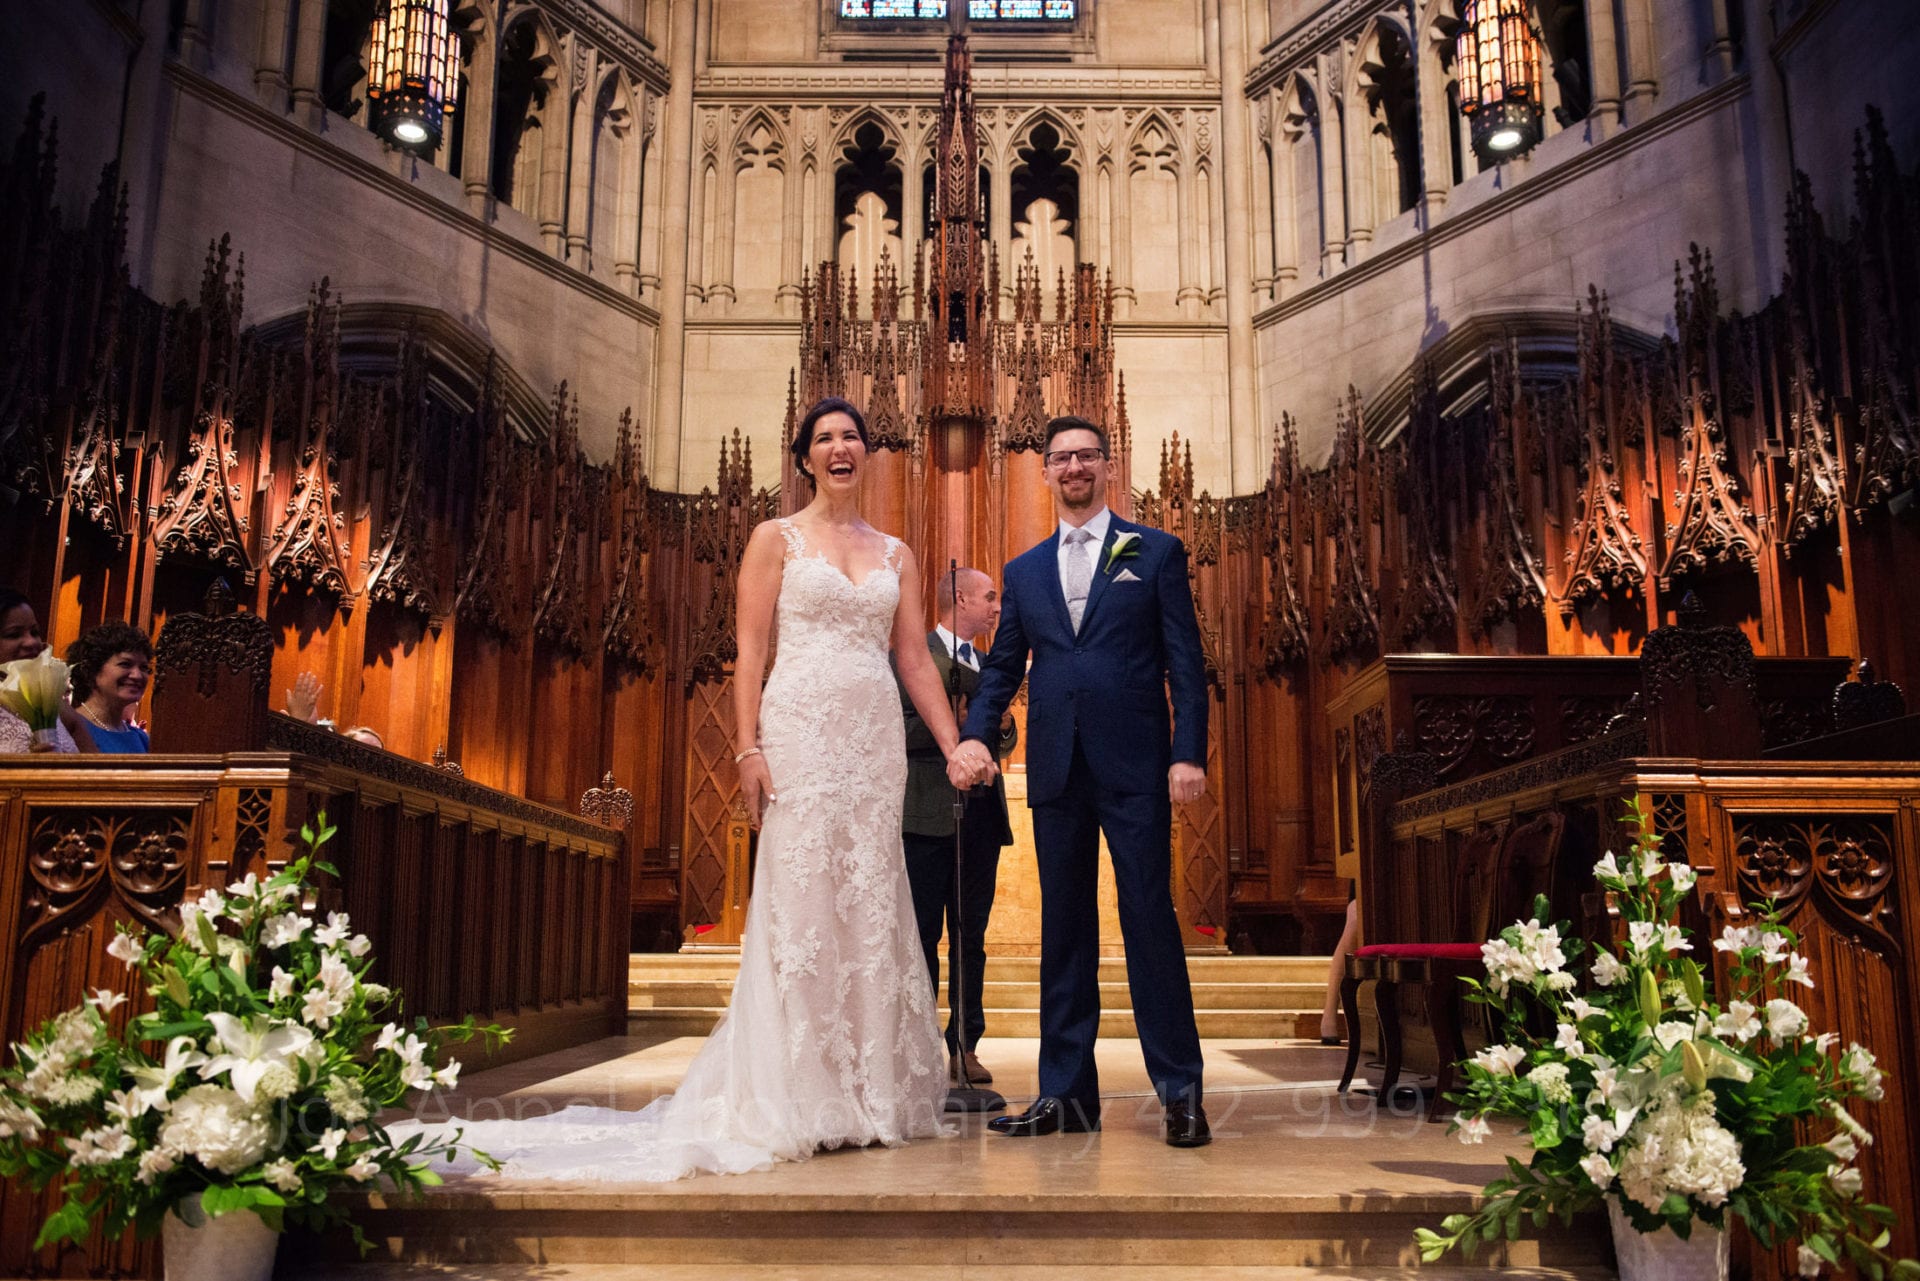 A bride and groom stand holding hands as they are presented to the audience at the end of their Heinz Chapel and LeMont Wedding.